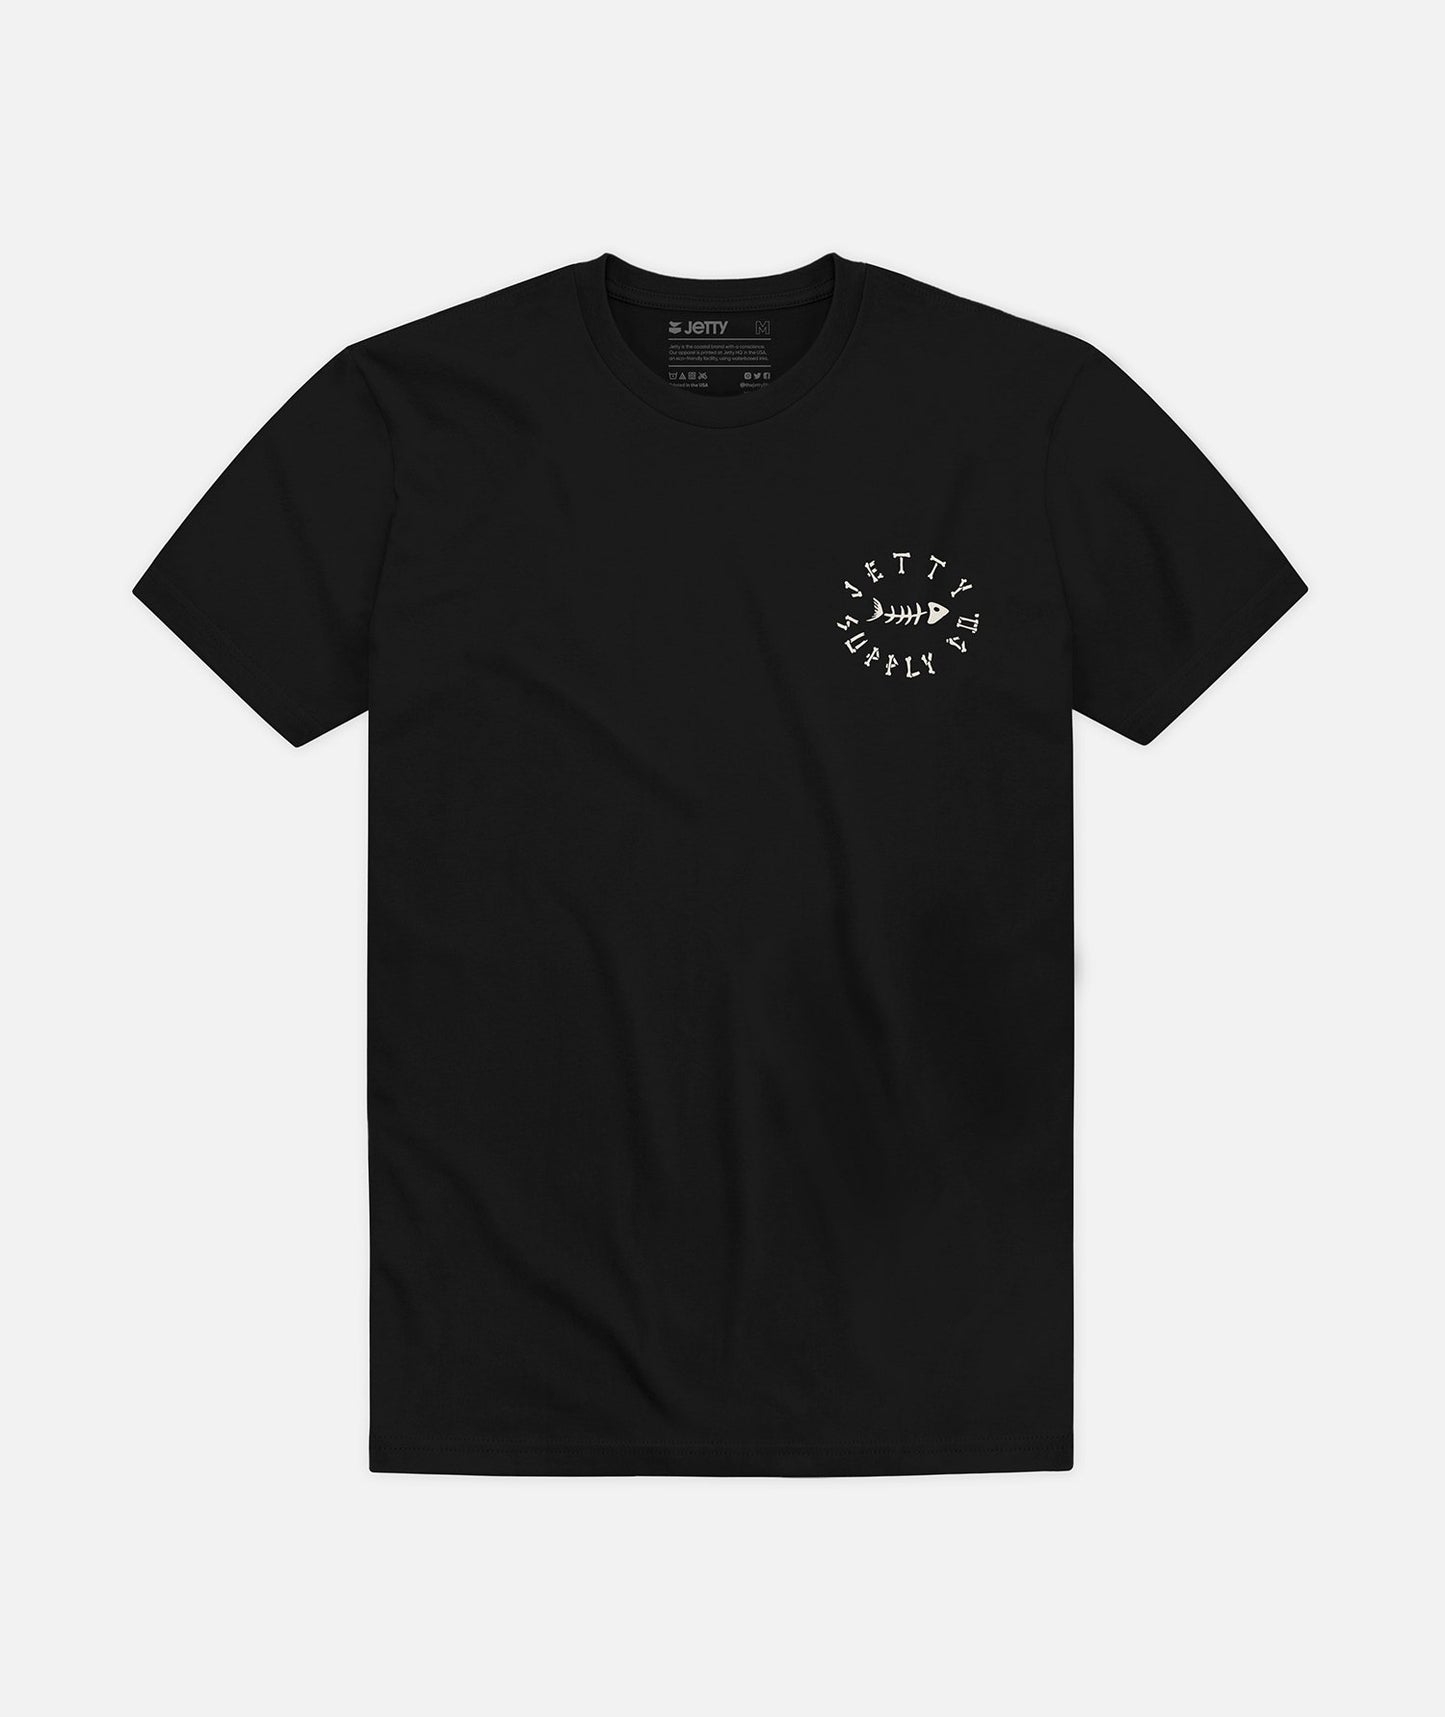 Jetty - Deadstick Youth Tee